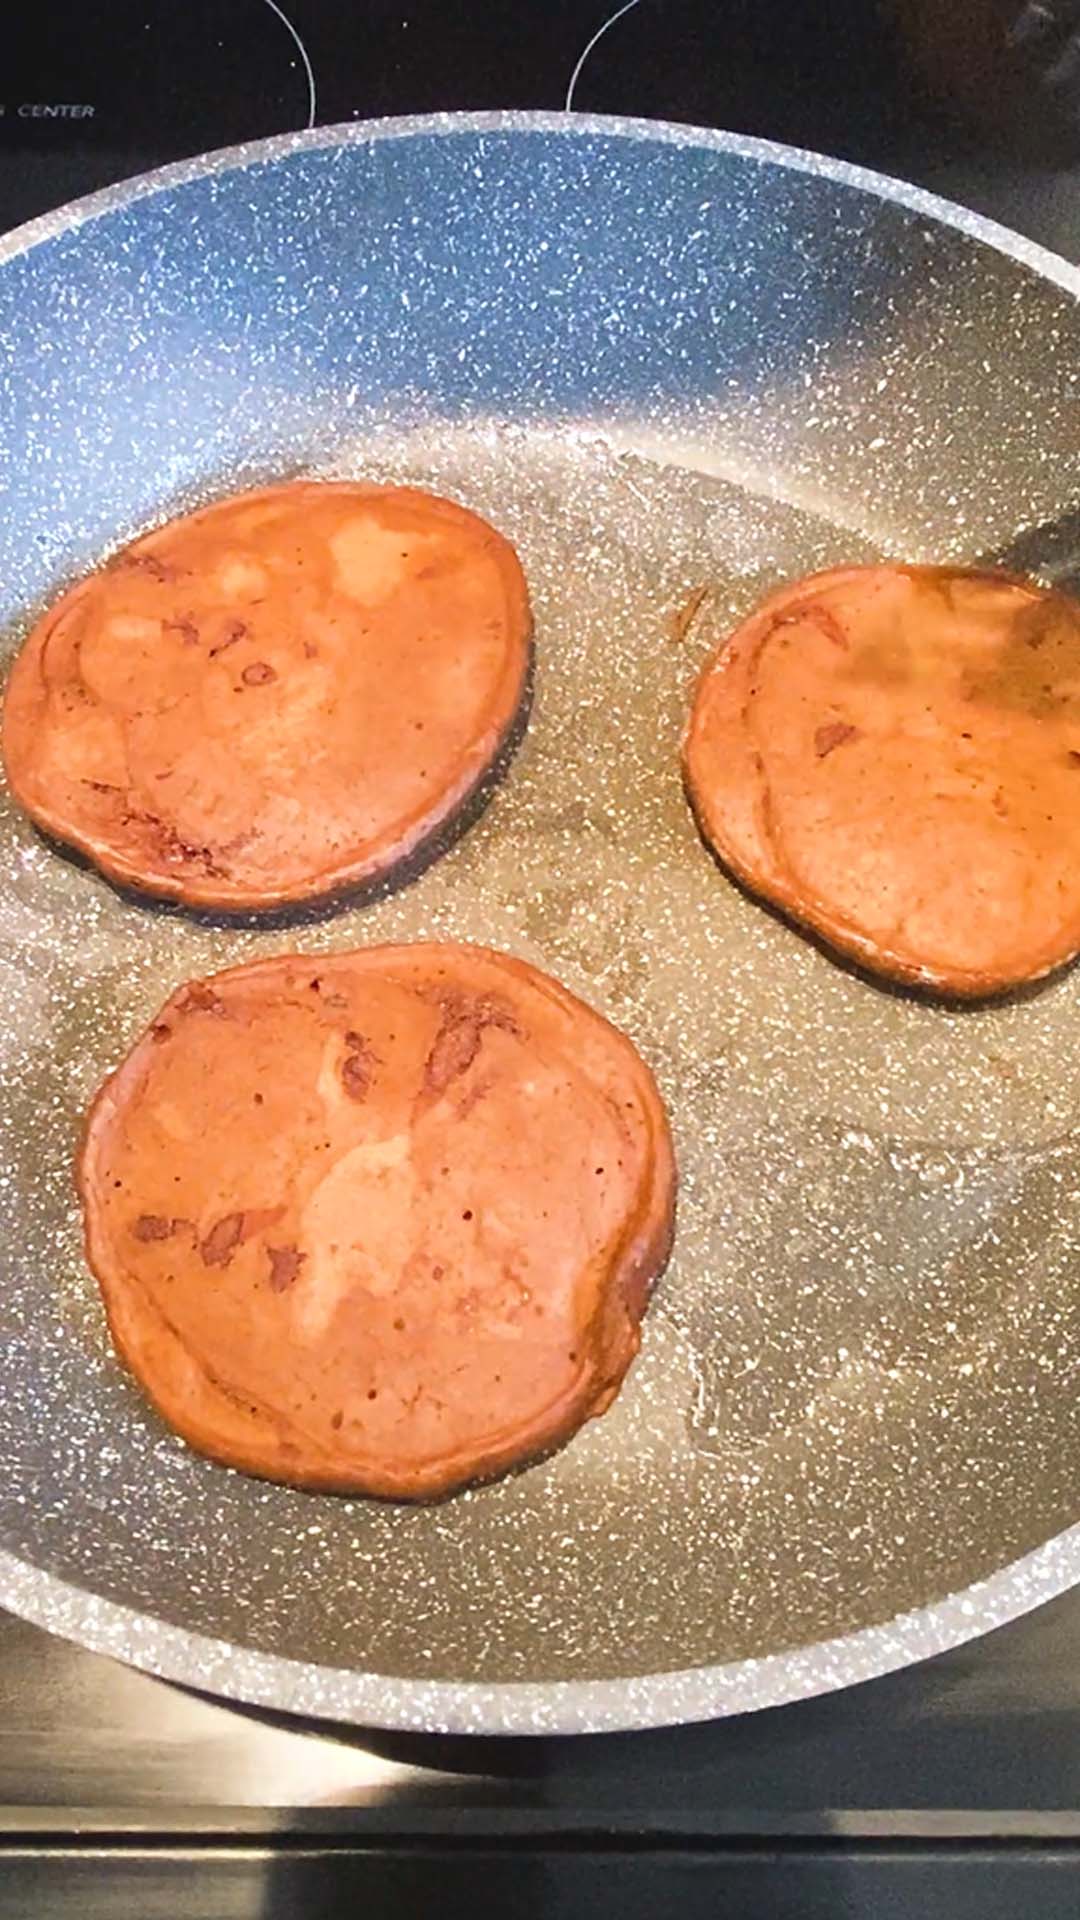 Three pancakes being cooked after having been flipped.